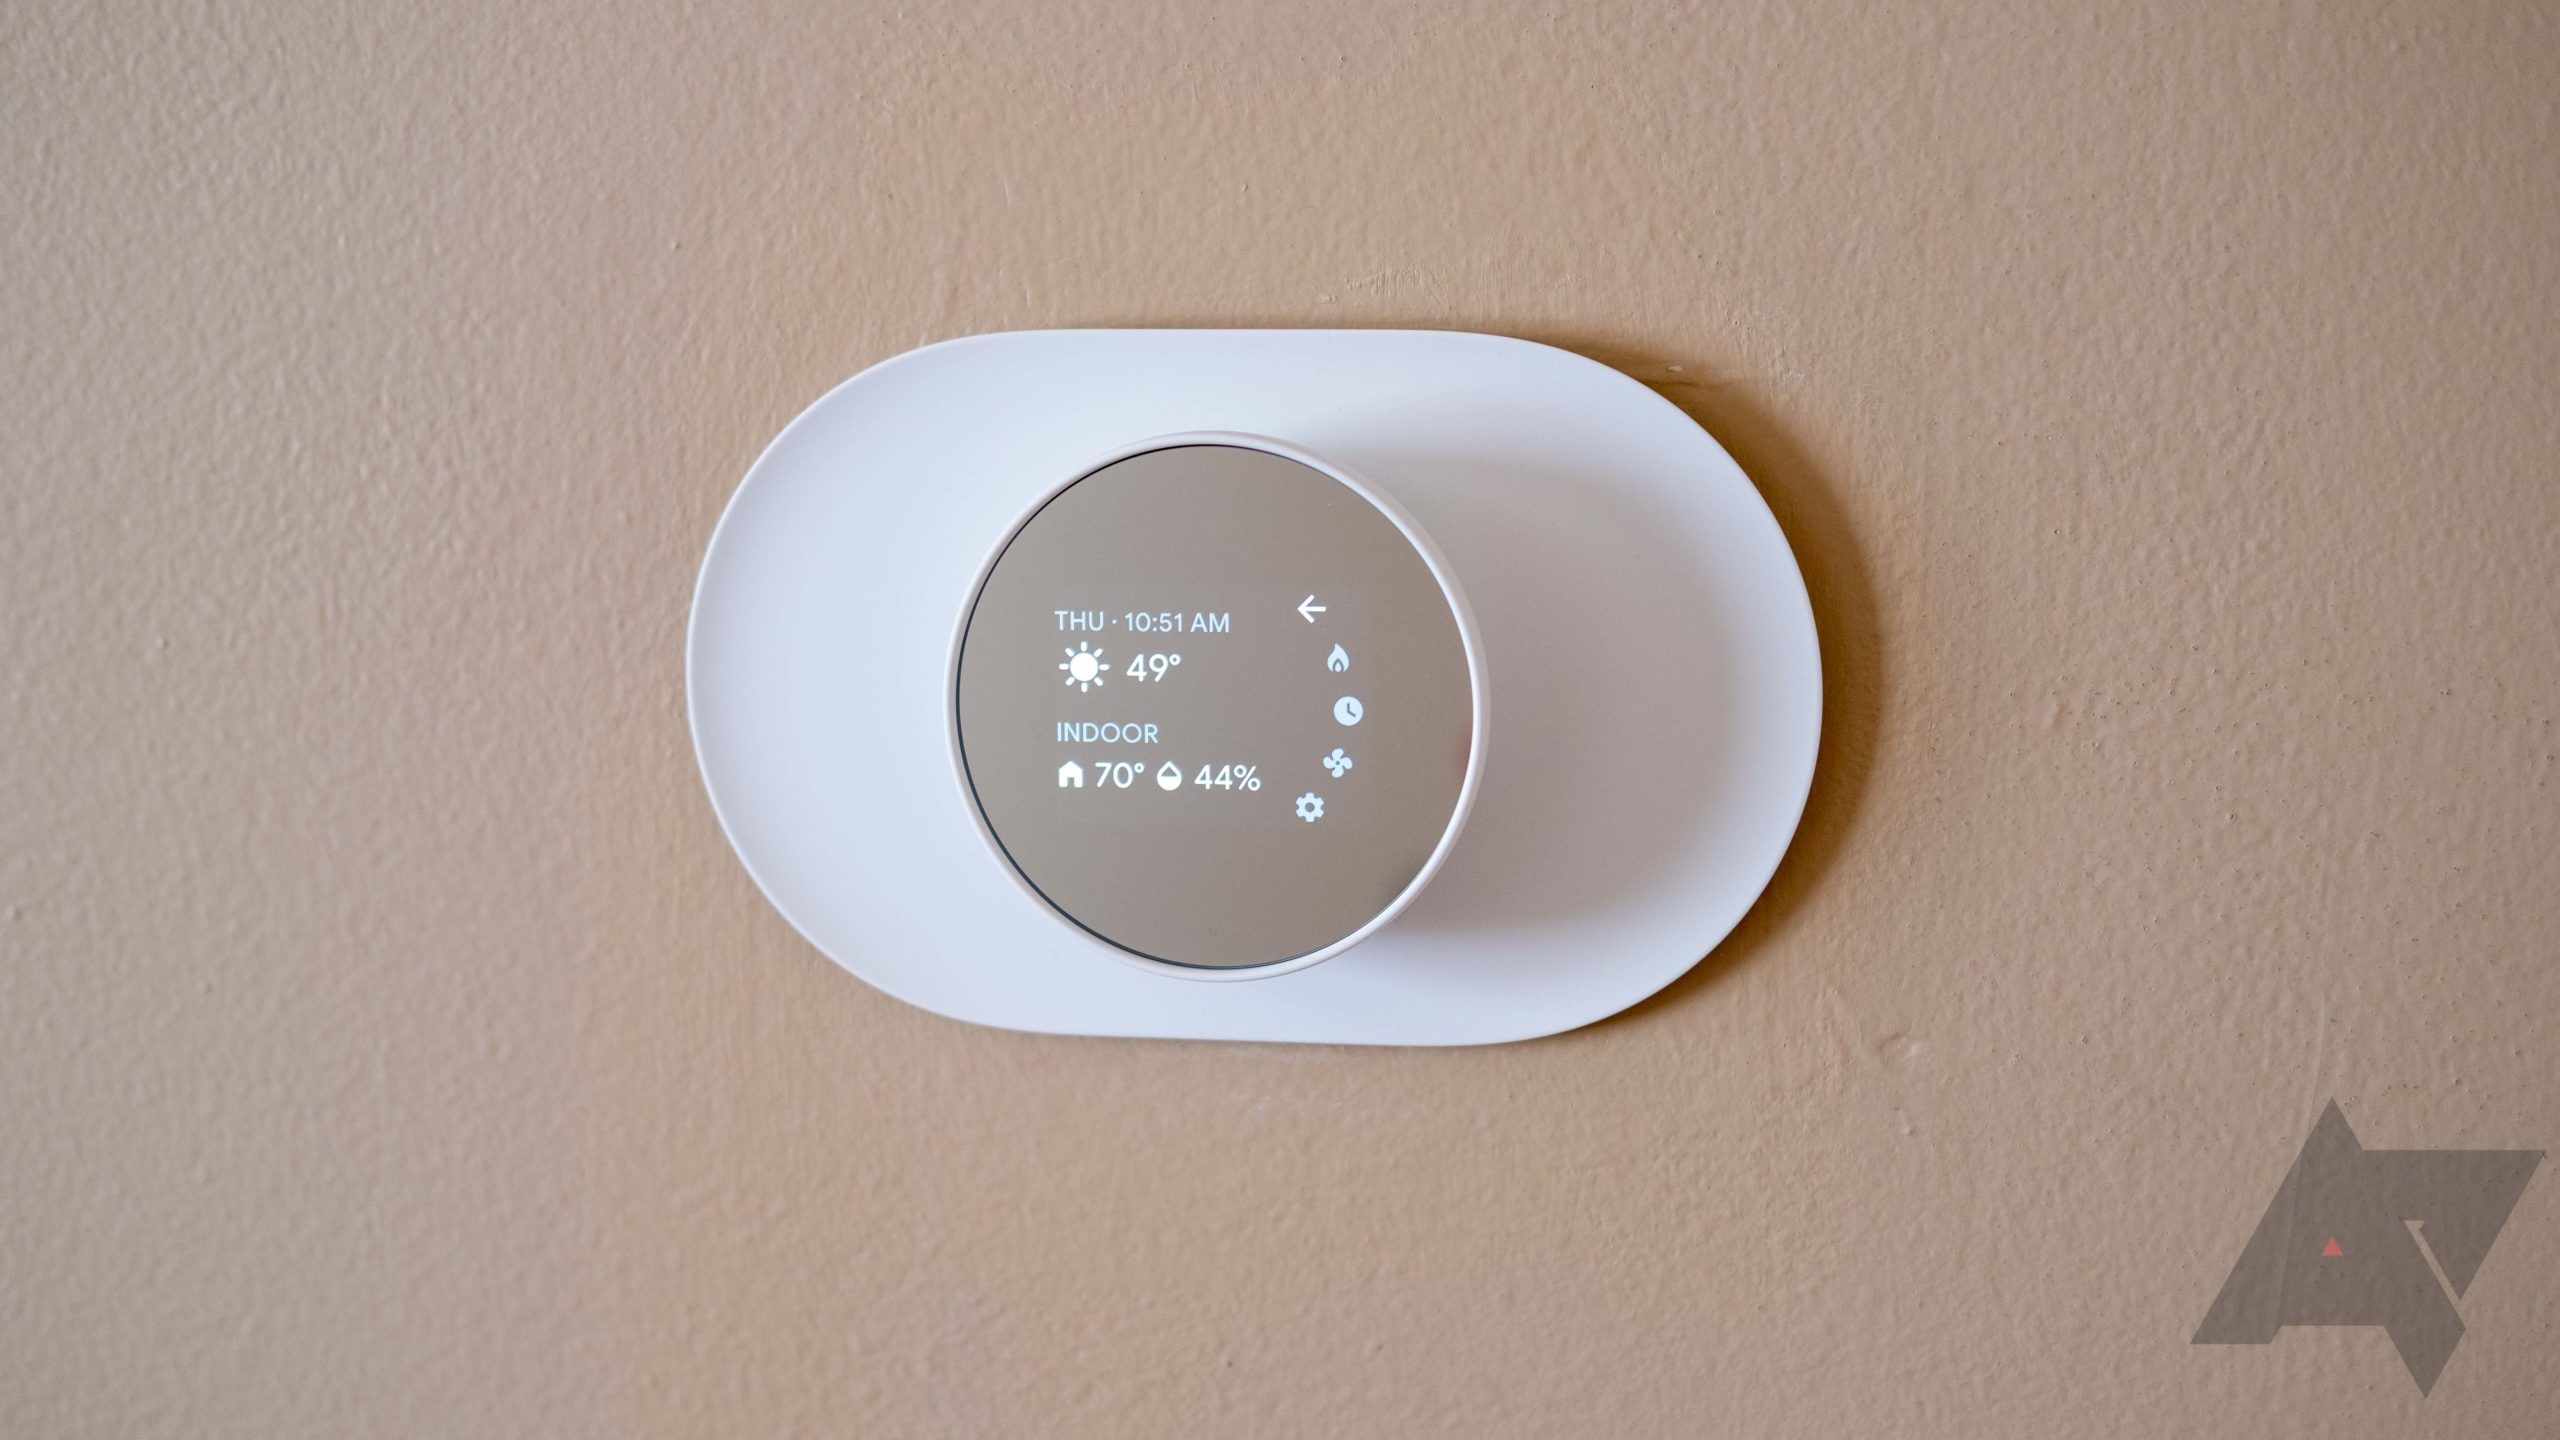 Front view of the Nest Thermostat